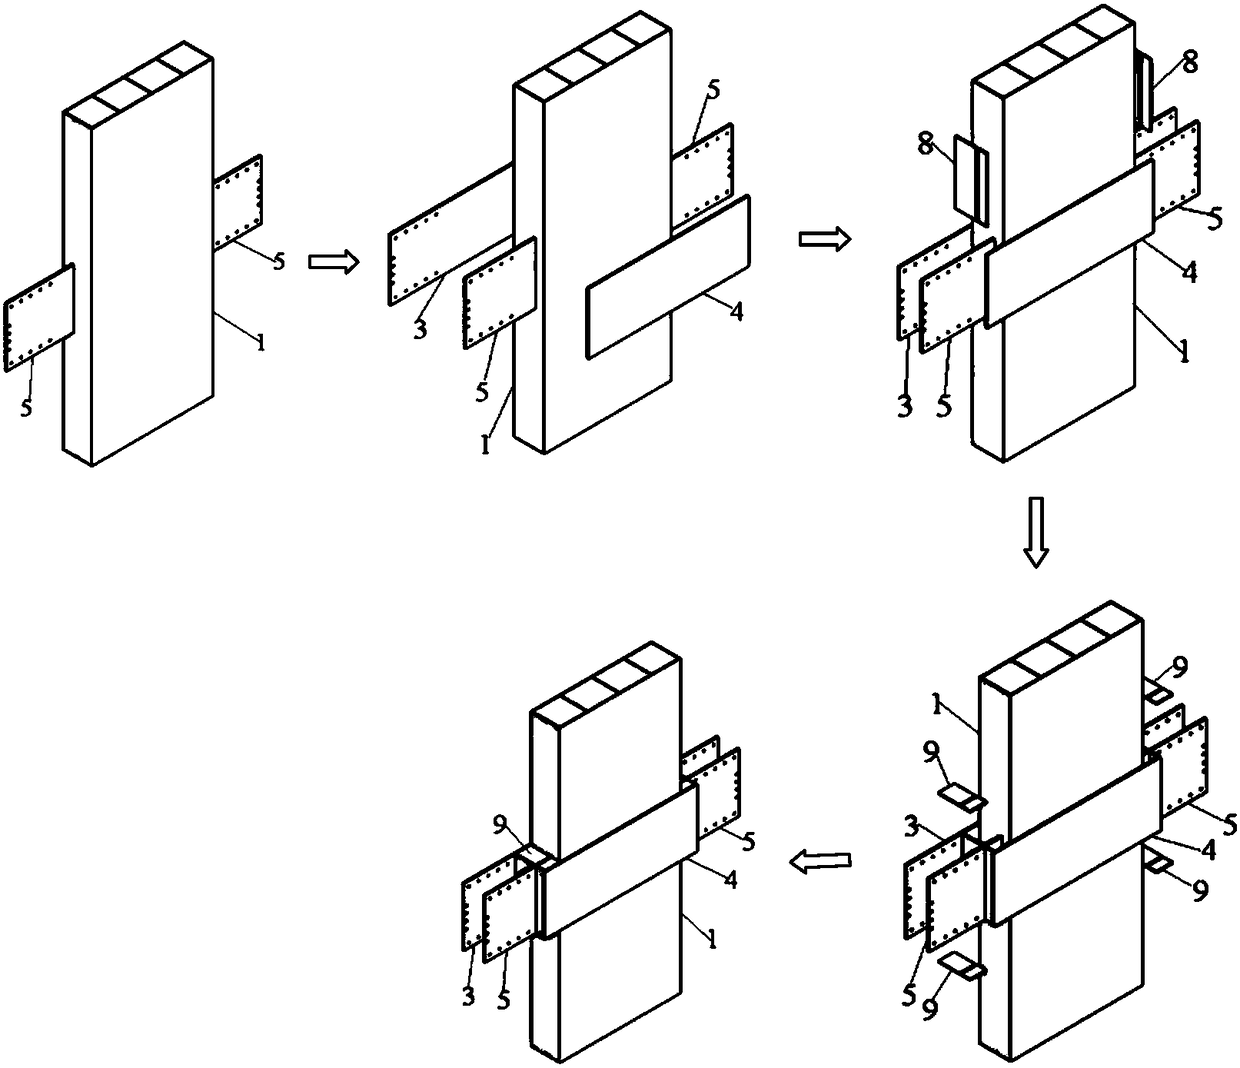 A three-side plate joint for eccentric beam-column connection and assembly method